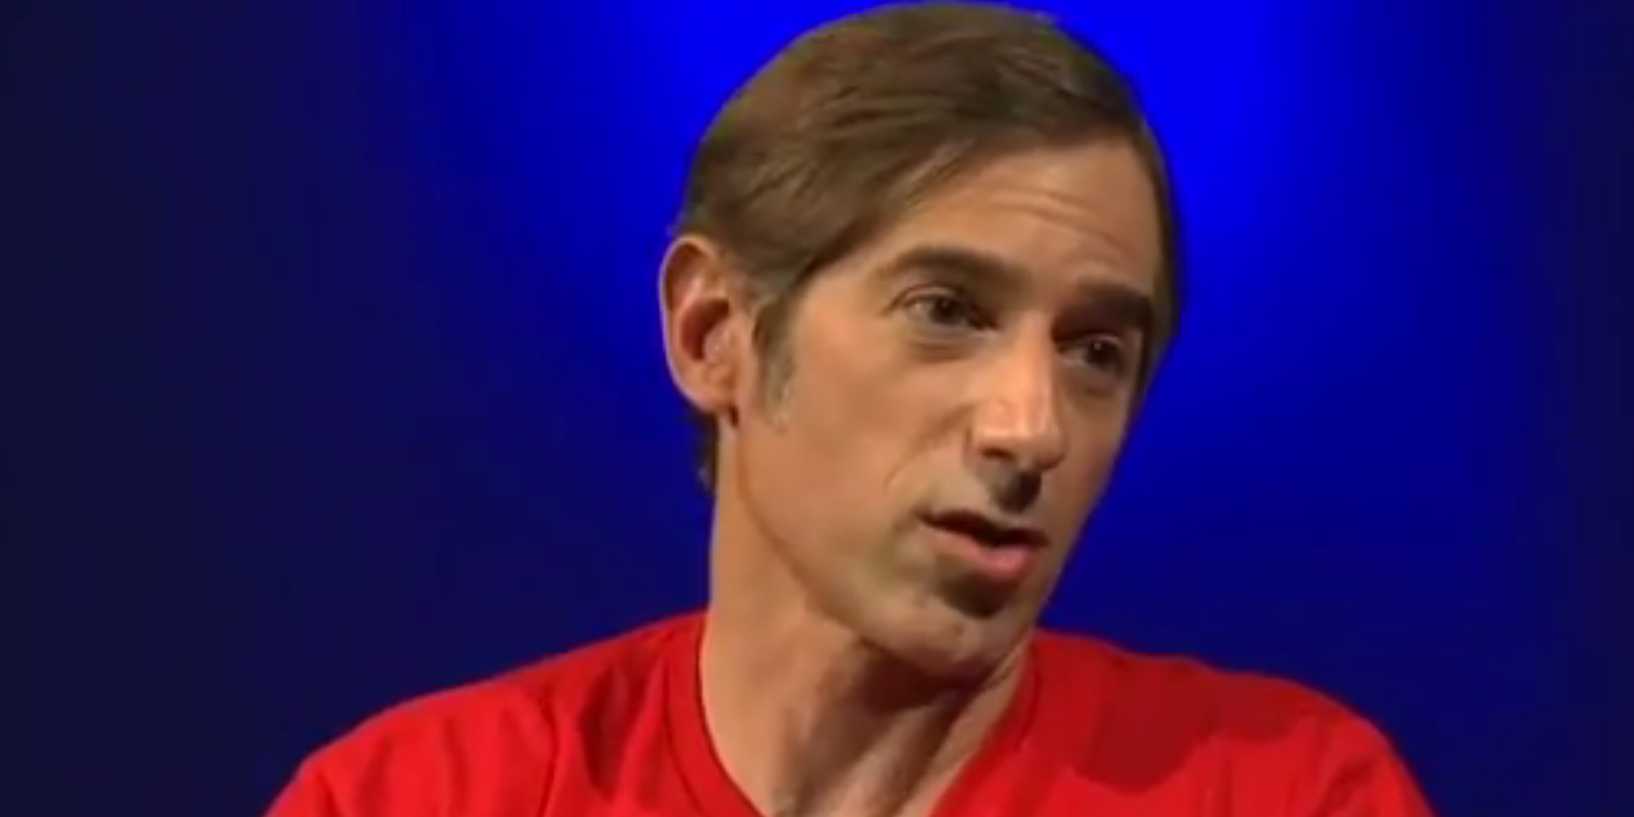 zynga-ceo-mark-pincus-heres-why-we-just-fired-520-people